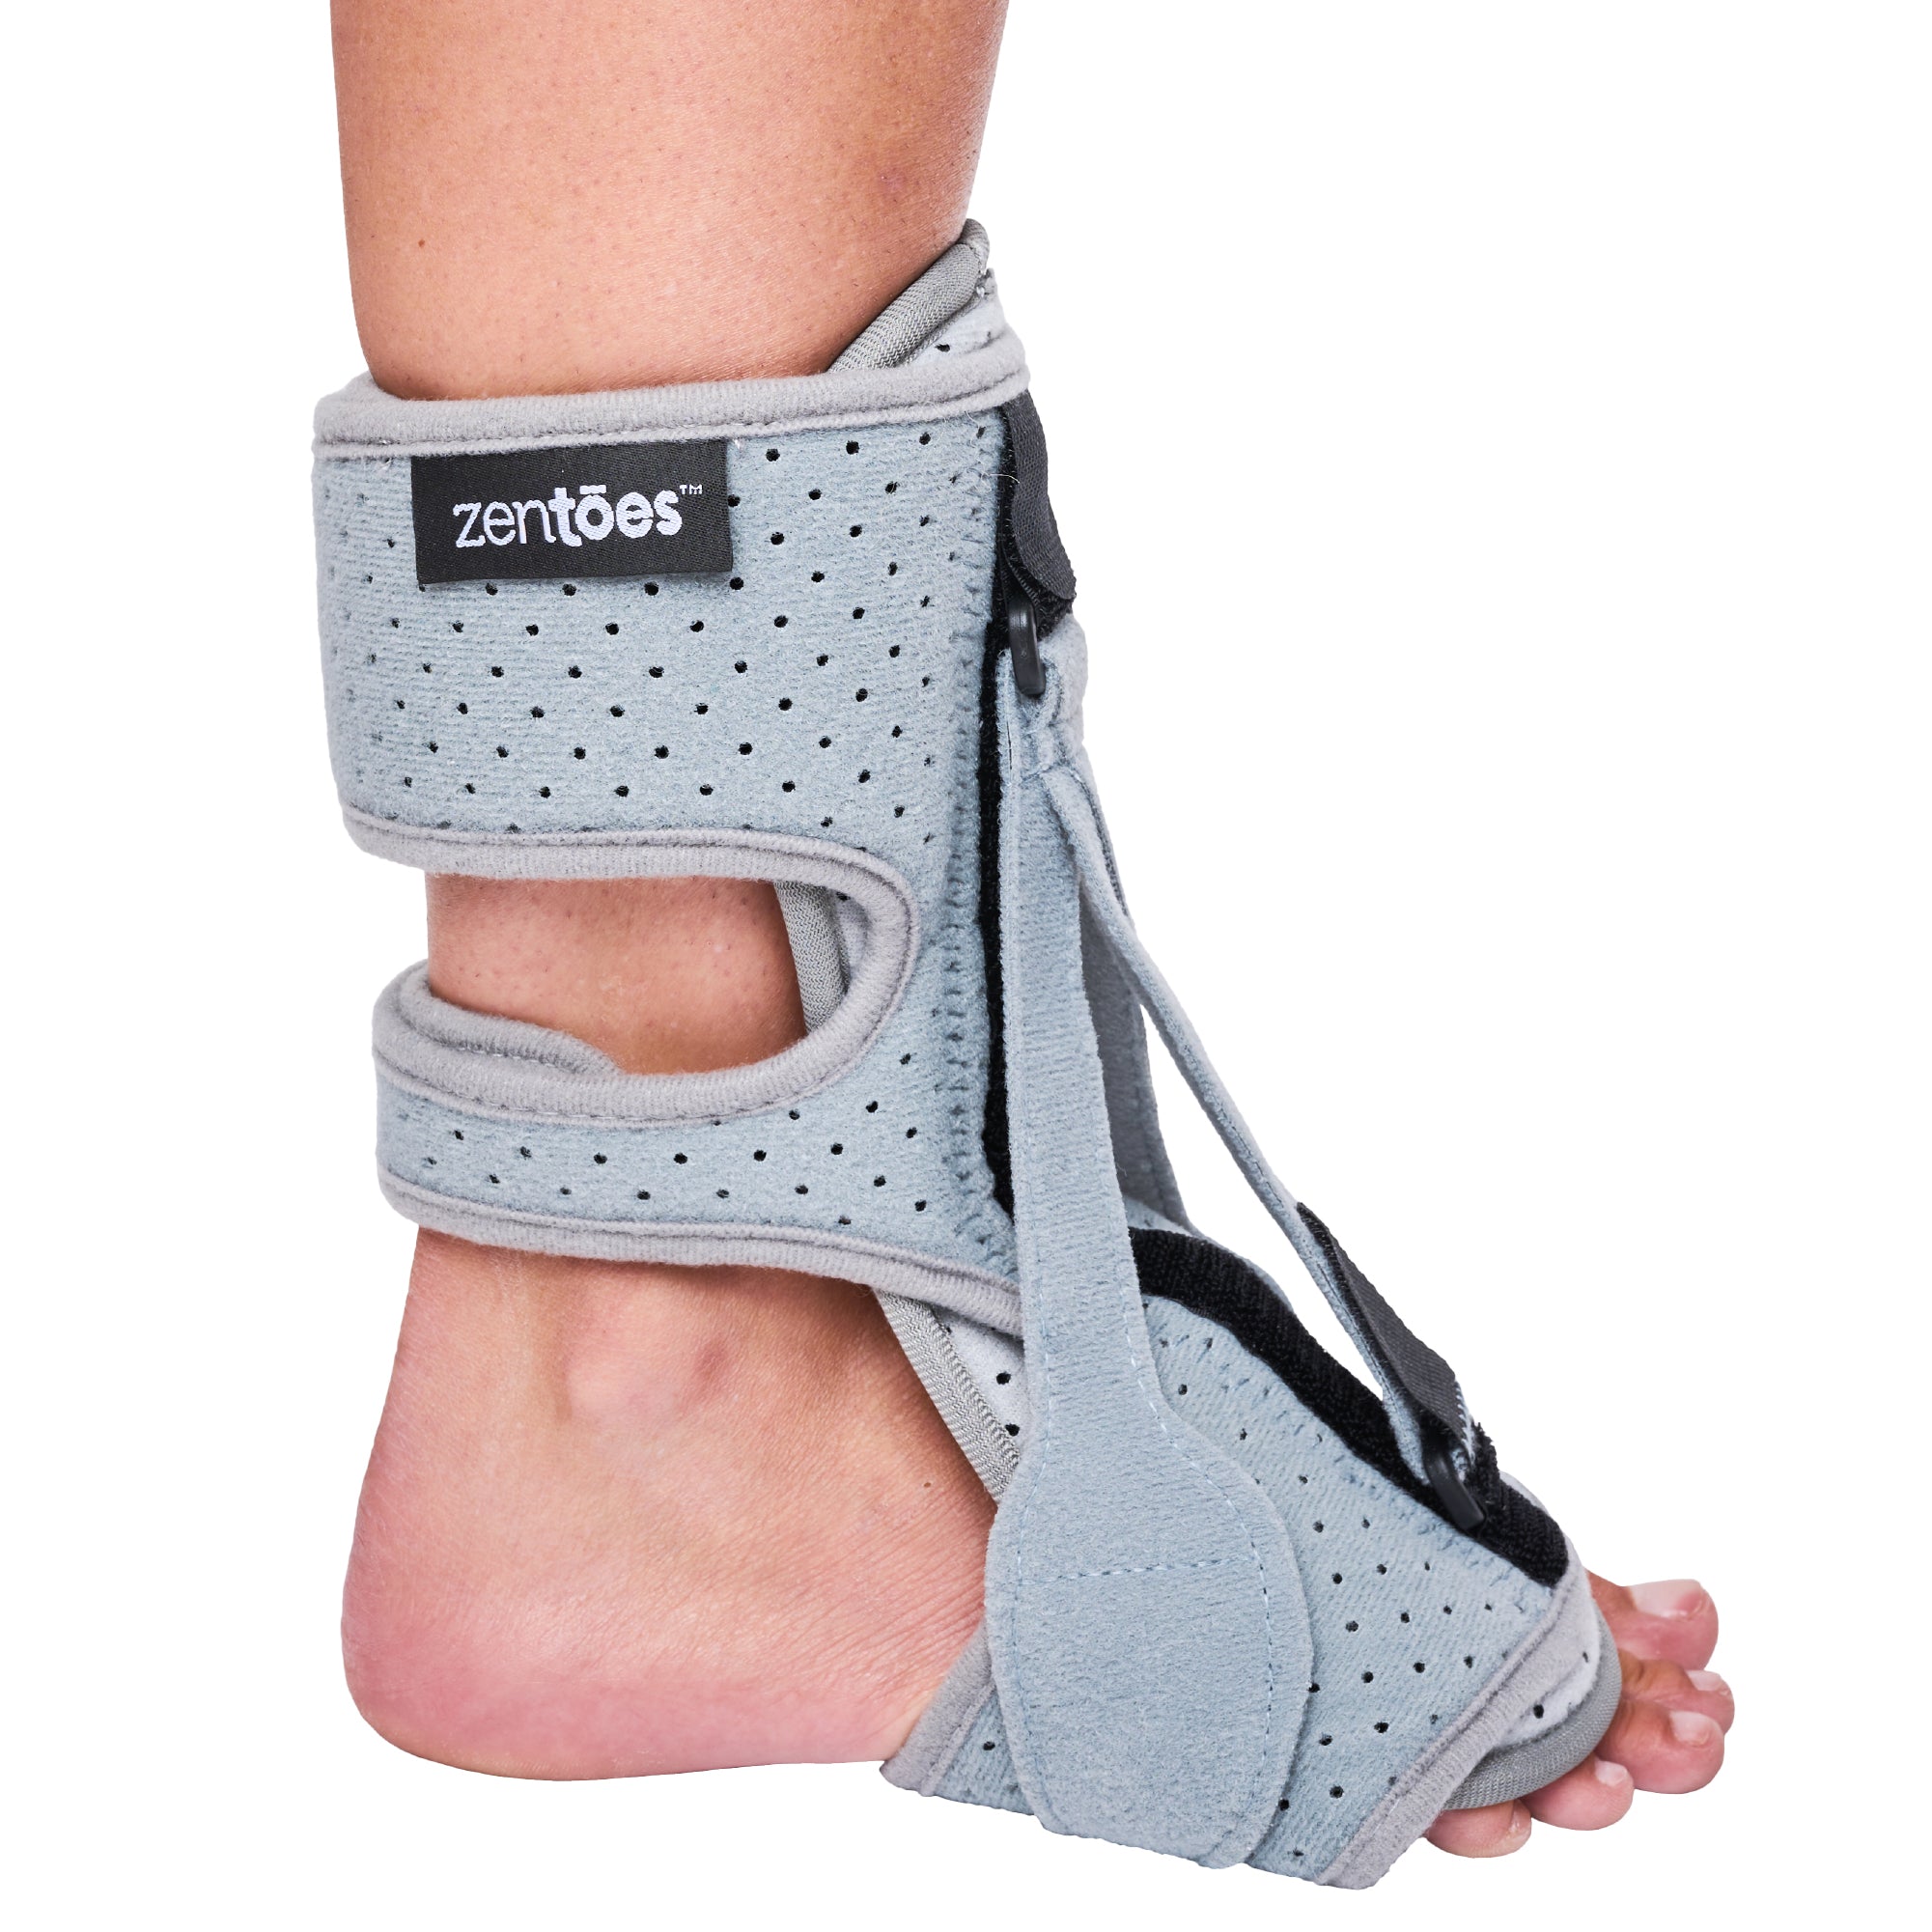 This Plantar Fasciitis Night Splint Got Rid of All My Foot Pain—And It's on  Major Sale